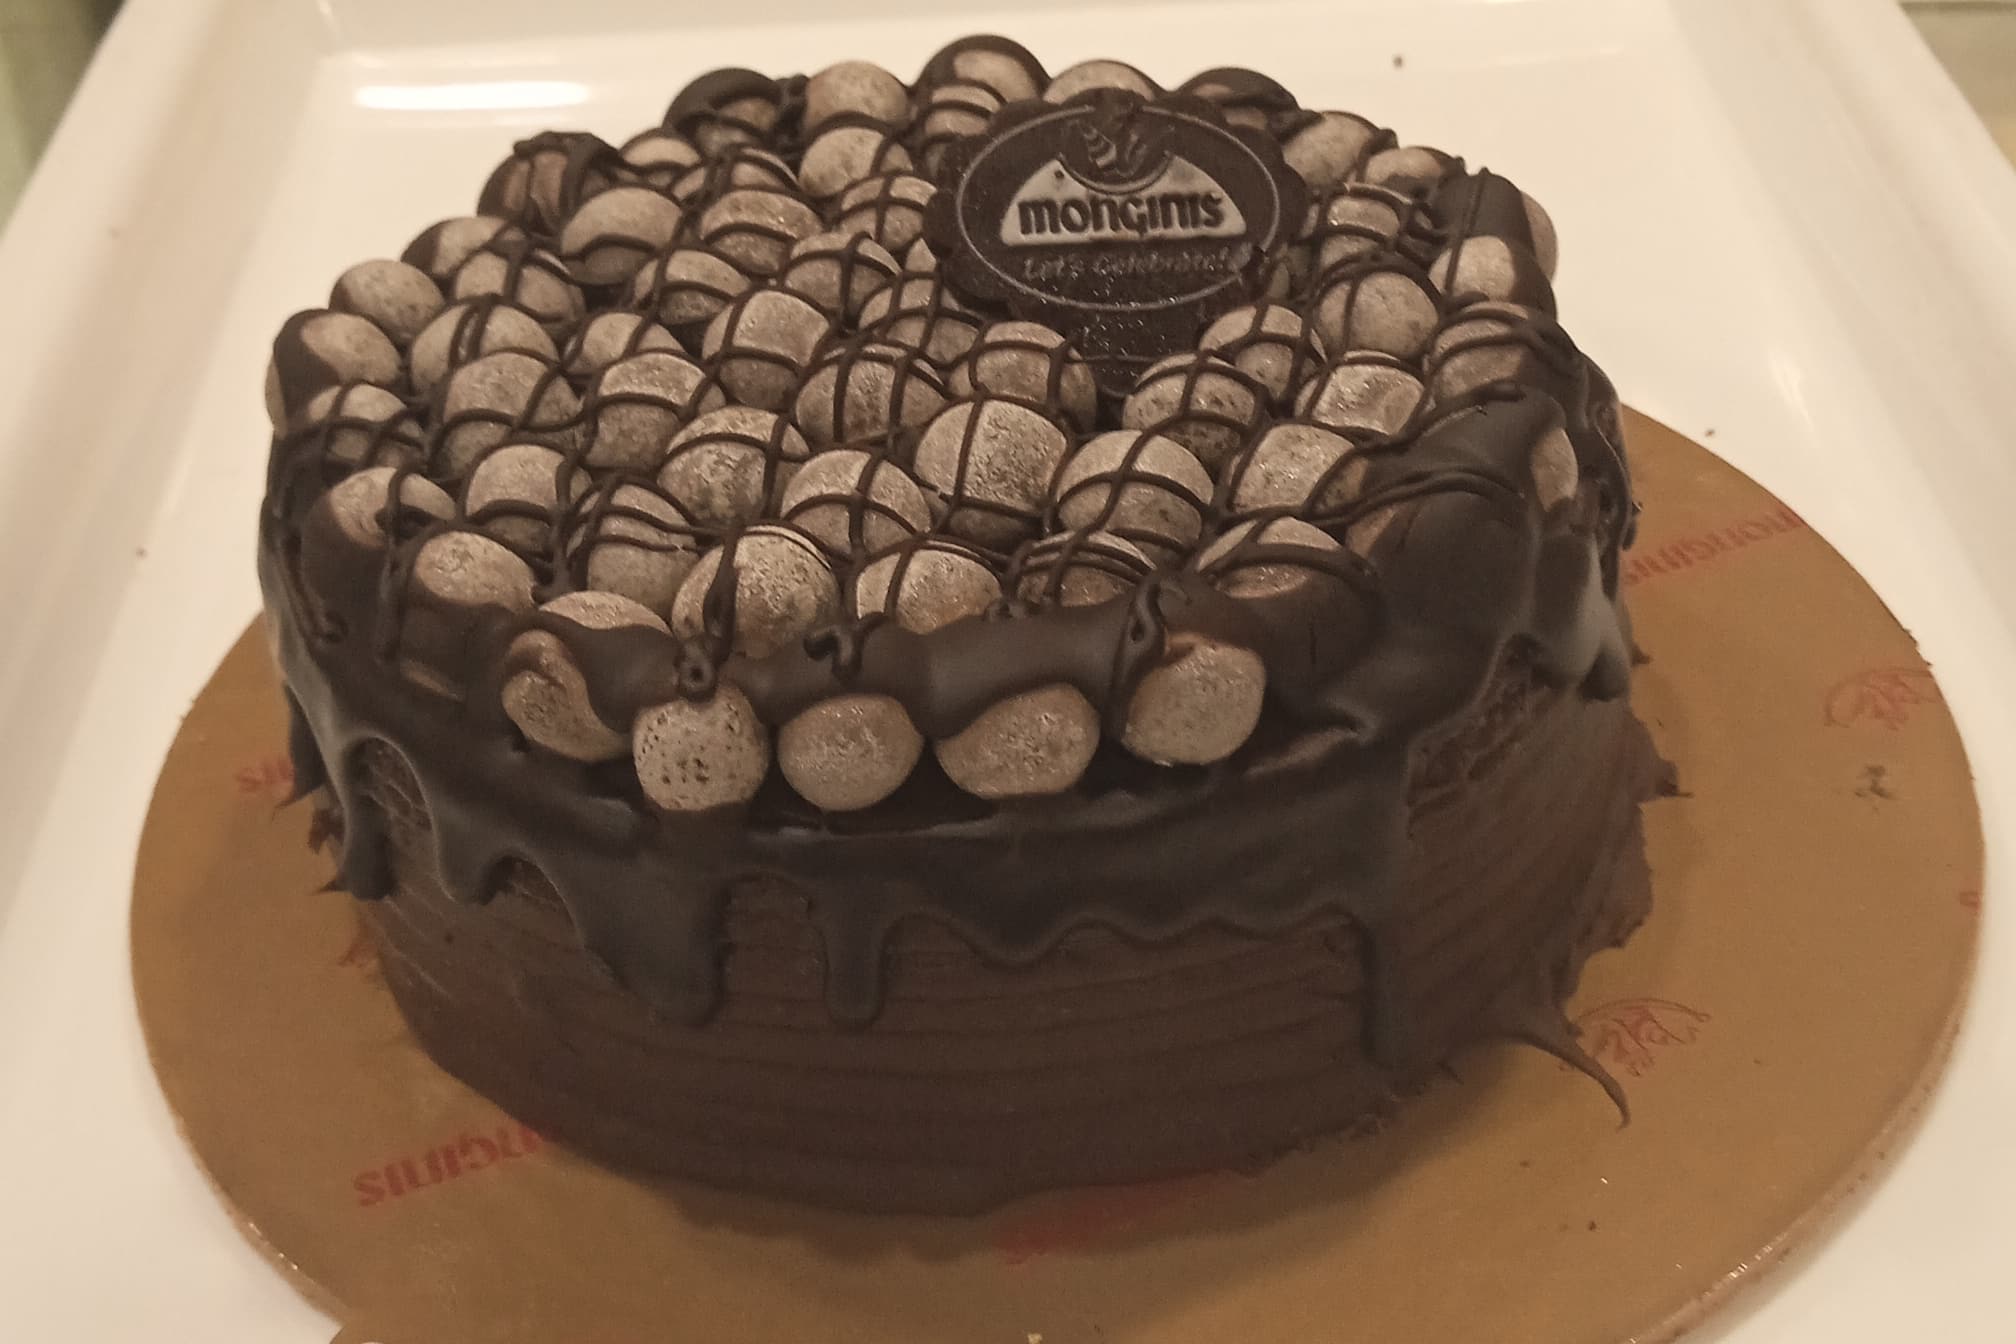 Monginis The Cake Shop, Model Town 1 order online - Zomato